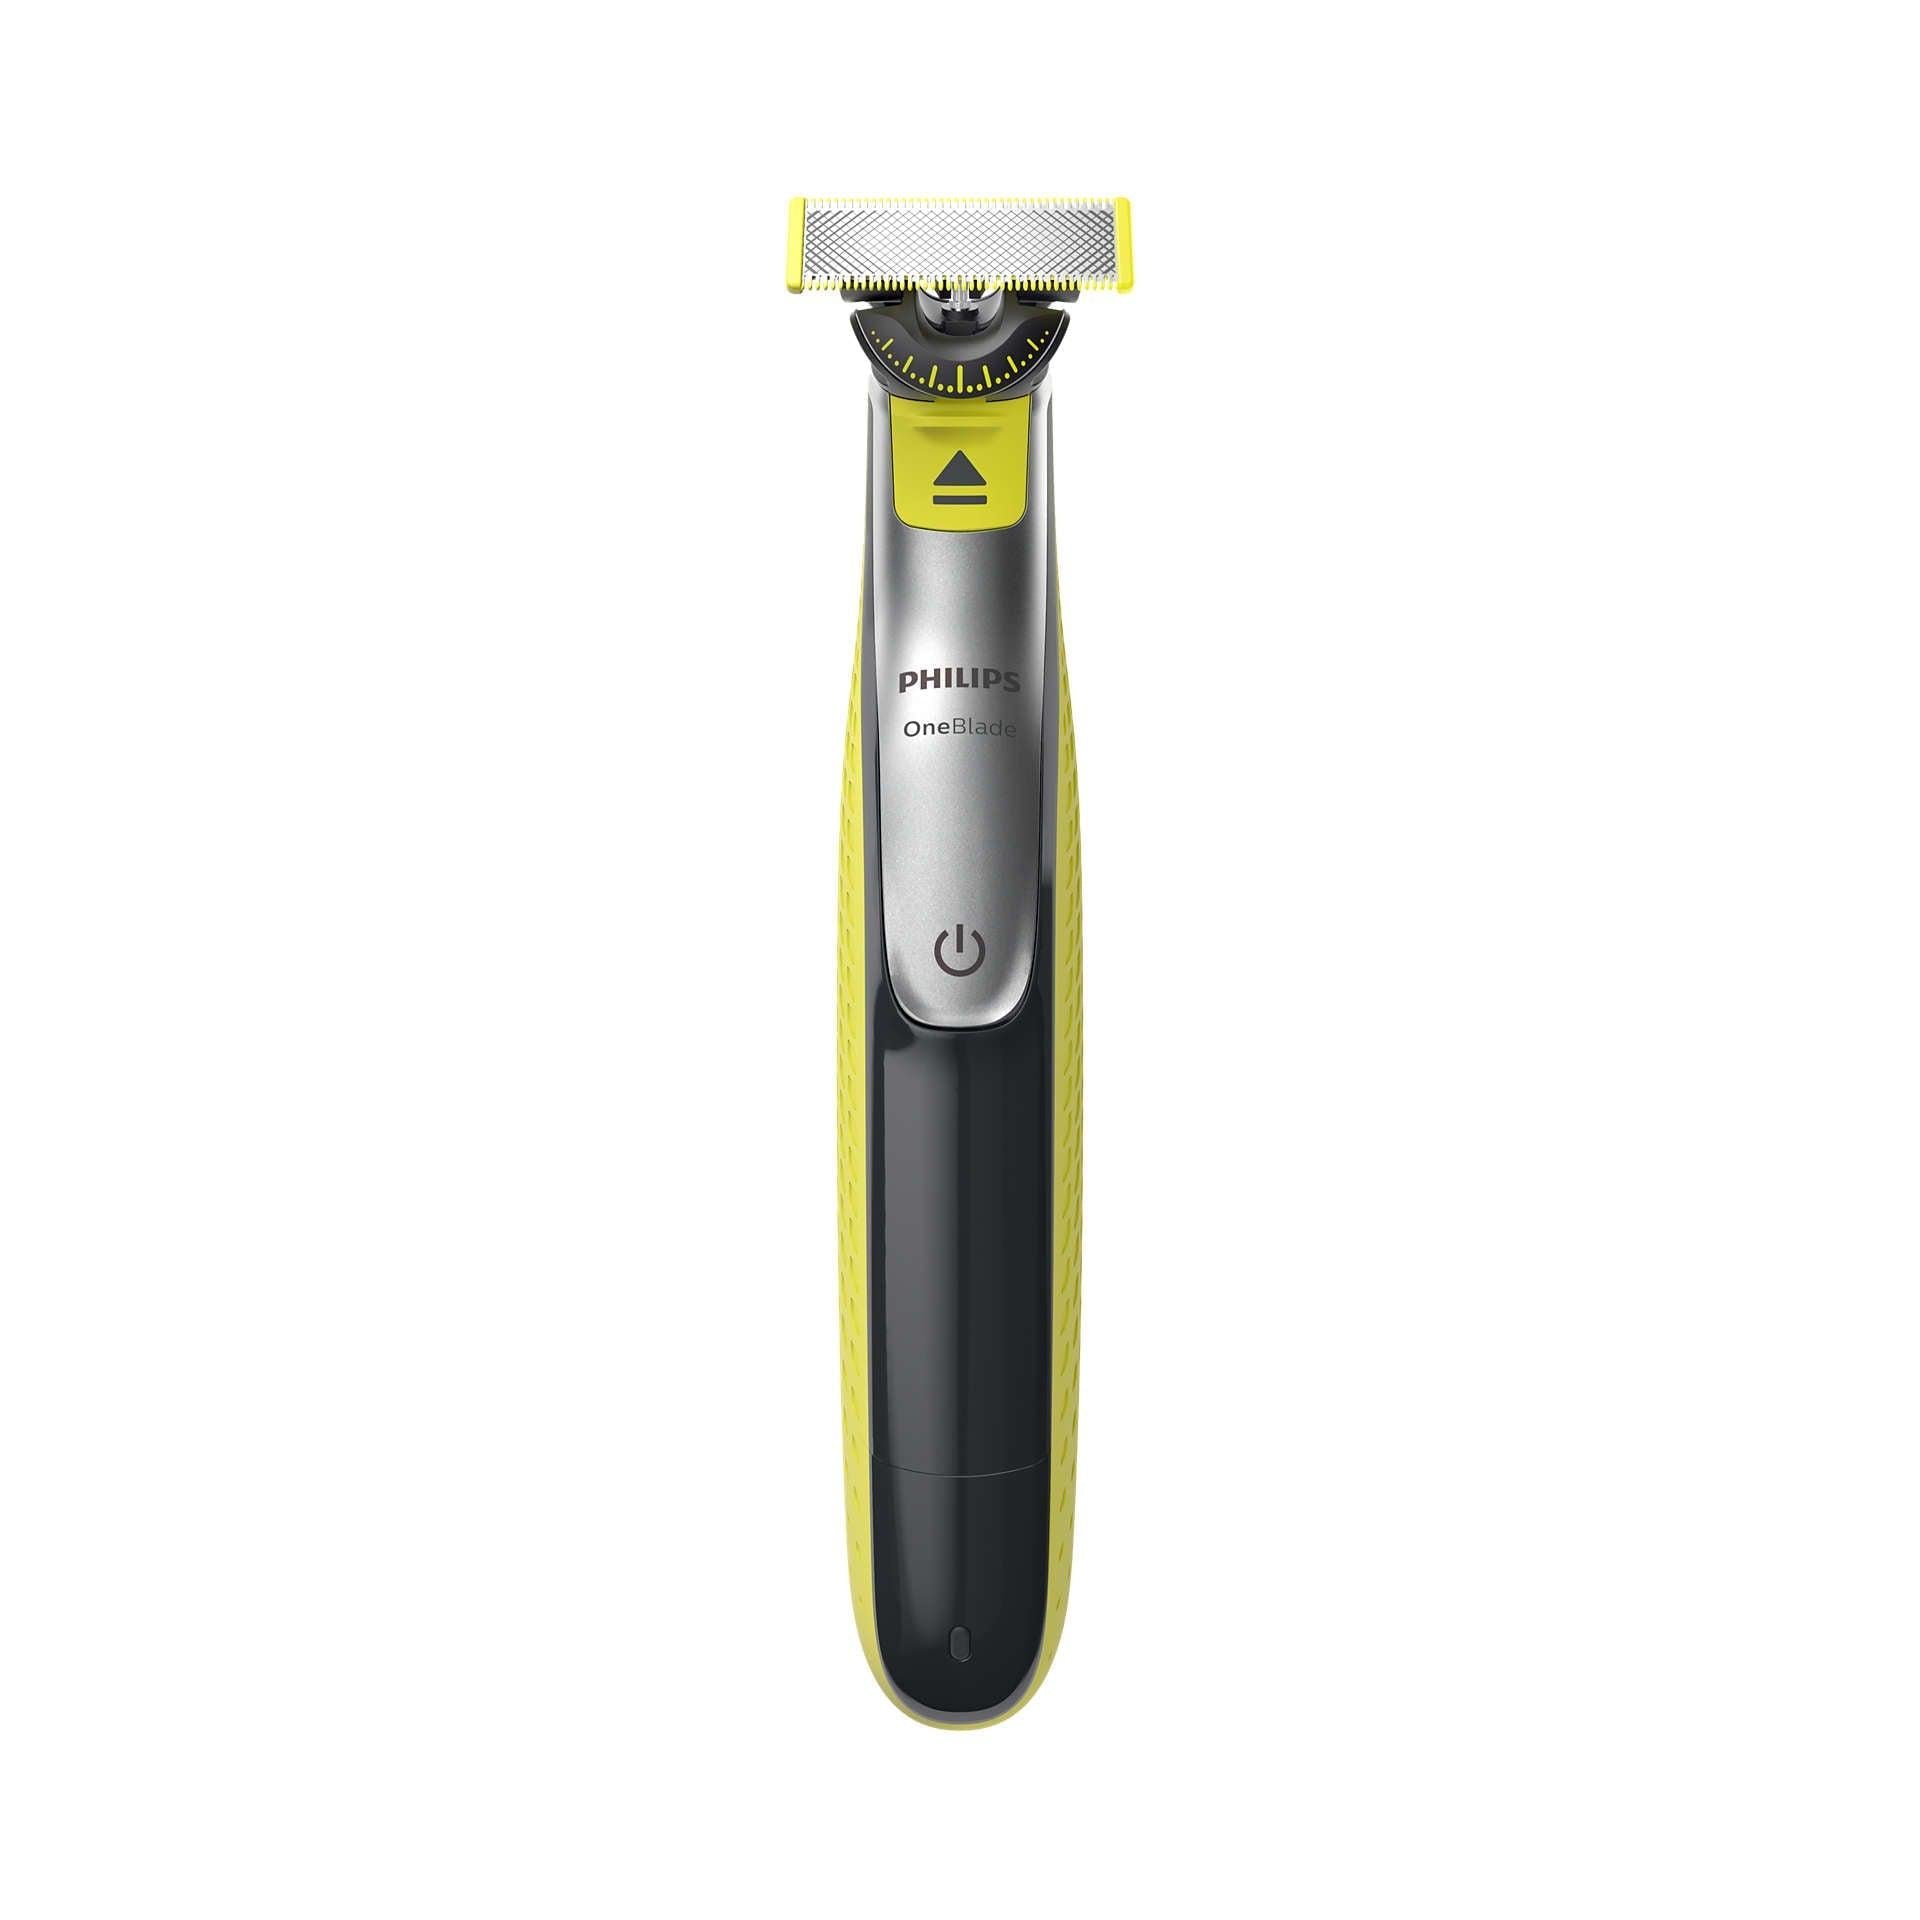 Philips Oneblade QP2830/20 Face & Body 5 in 1 Wet & Dry